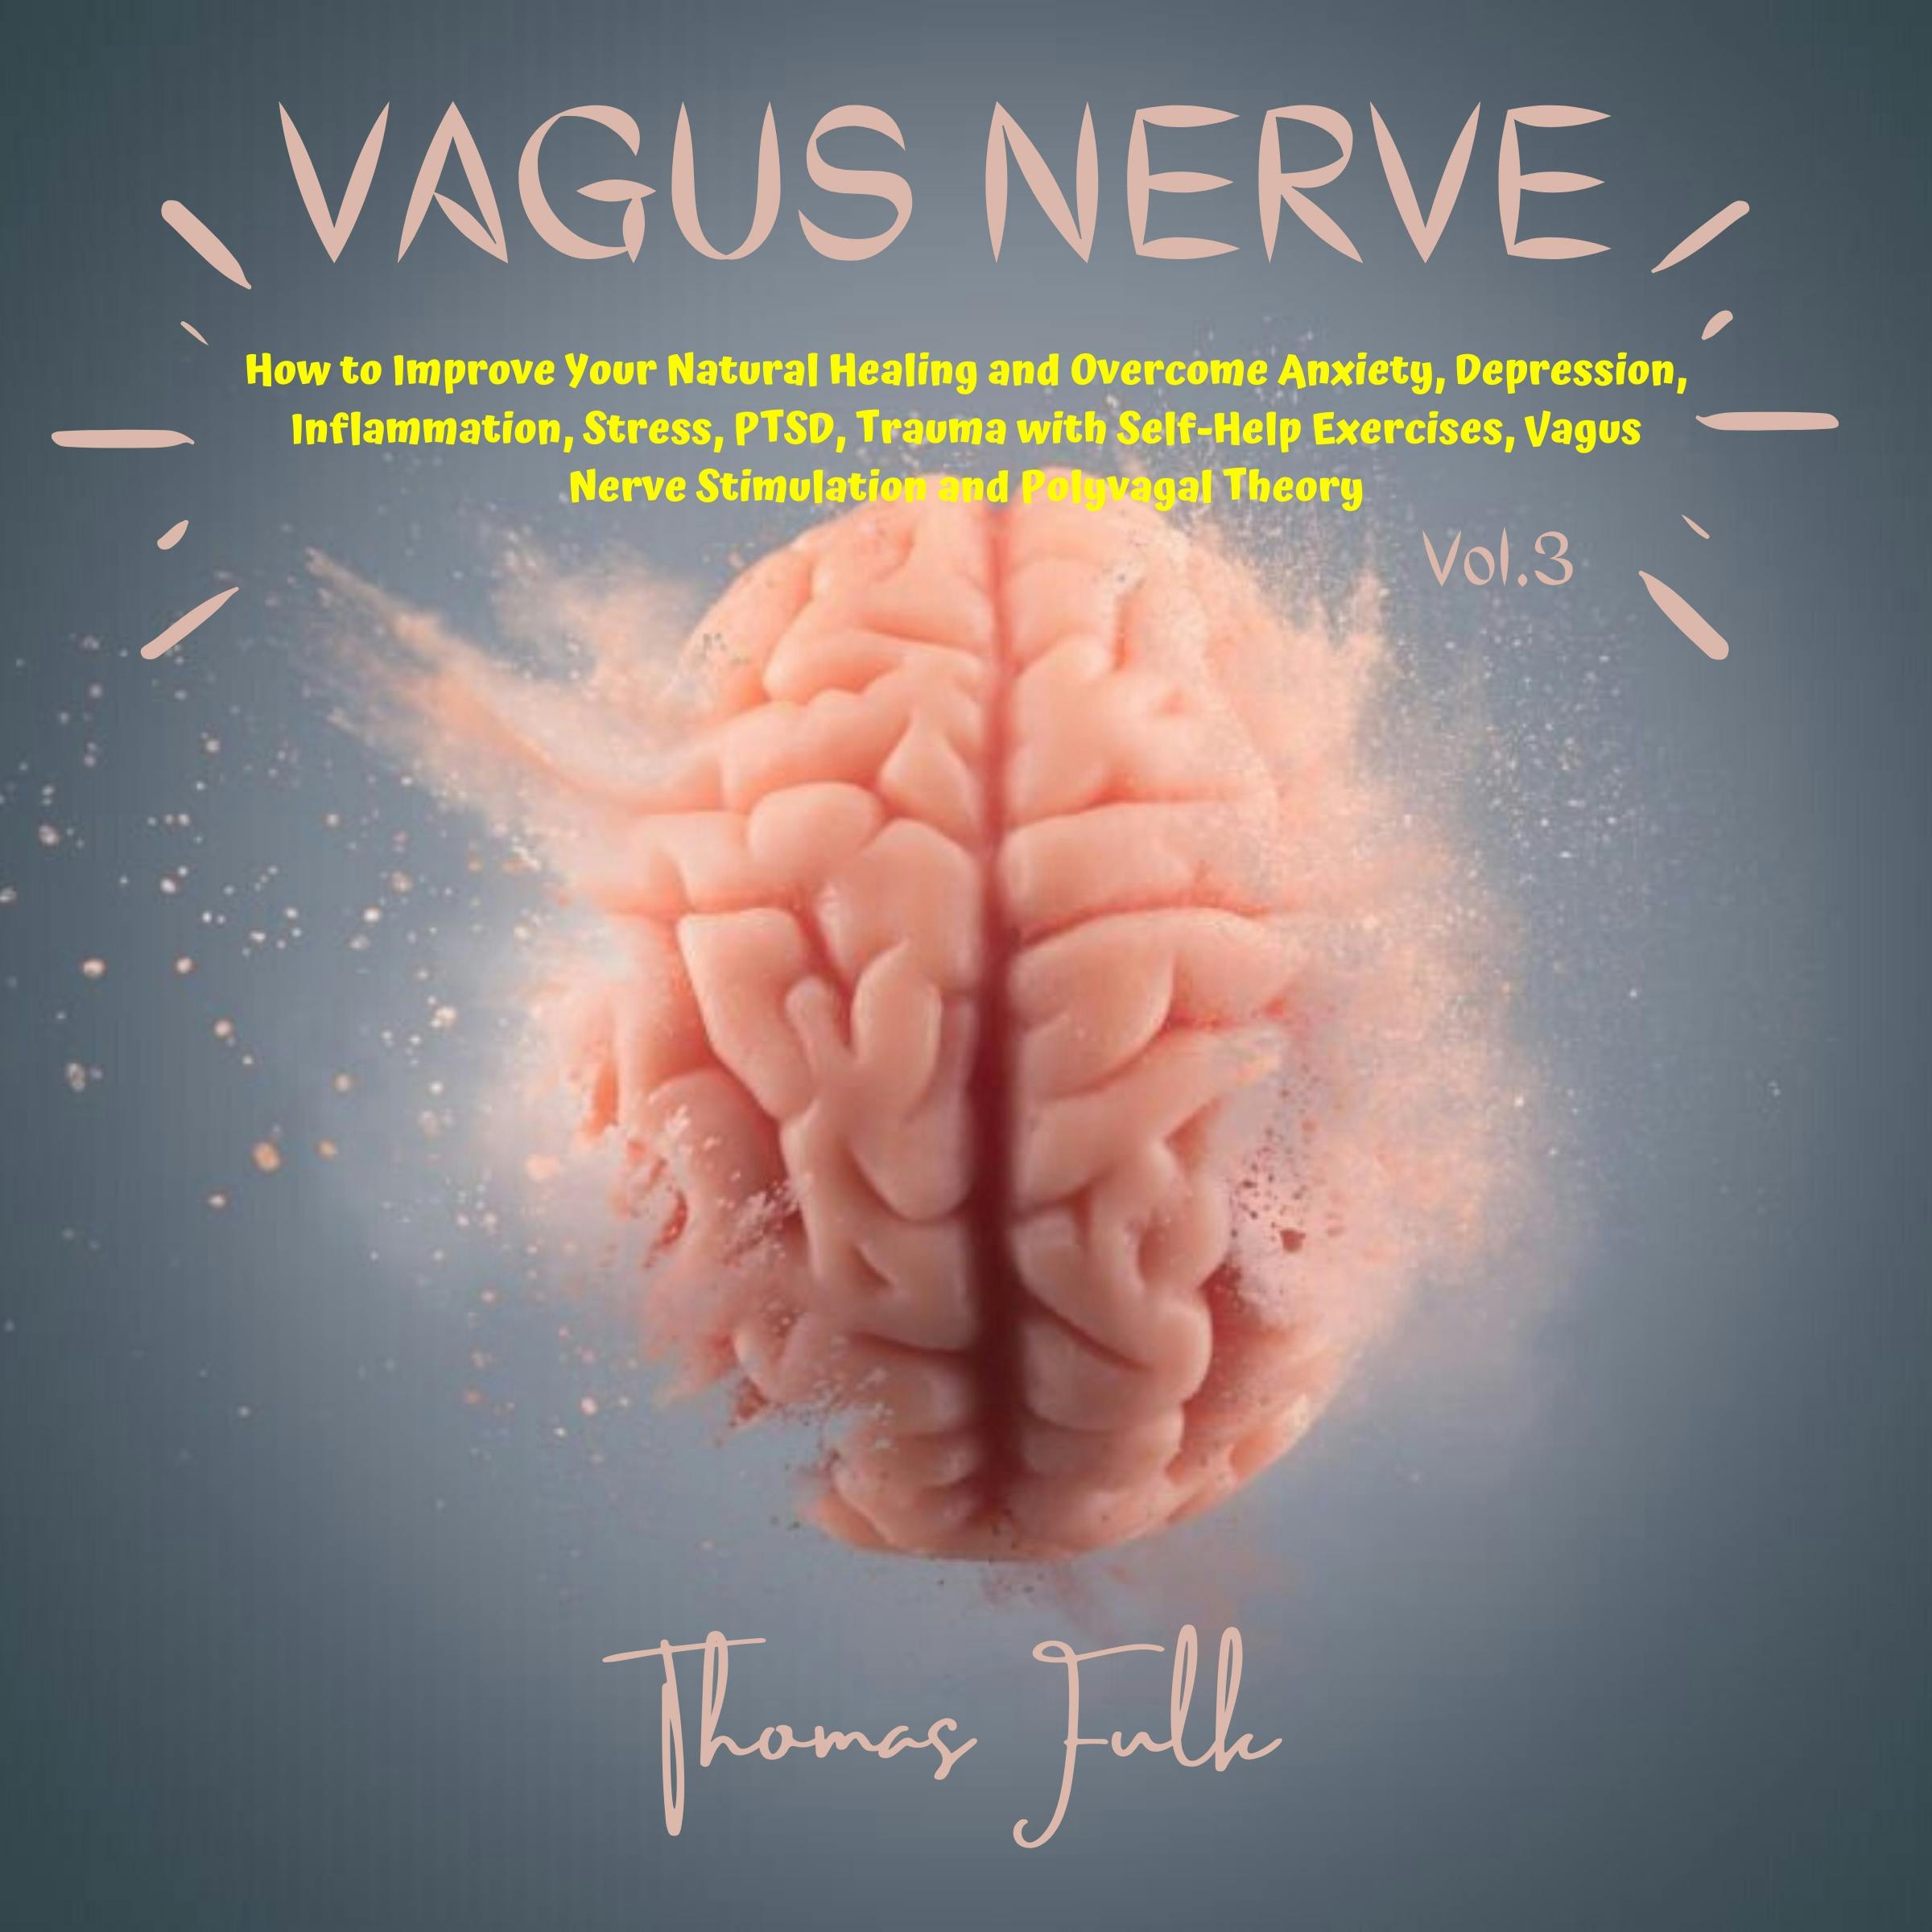 Vagus Nerve: How to Improve Your Natural Healing and Overcome Anxiety, Depression, Inflammation, Stress, PTSD, Trauma with Self-Help Exercises, Vagus Nerve Stimulation and Polyvagal Theory, Vol.3 - undefined